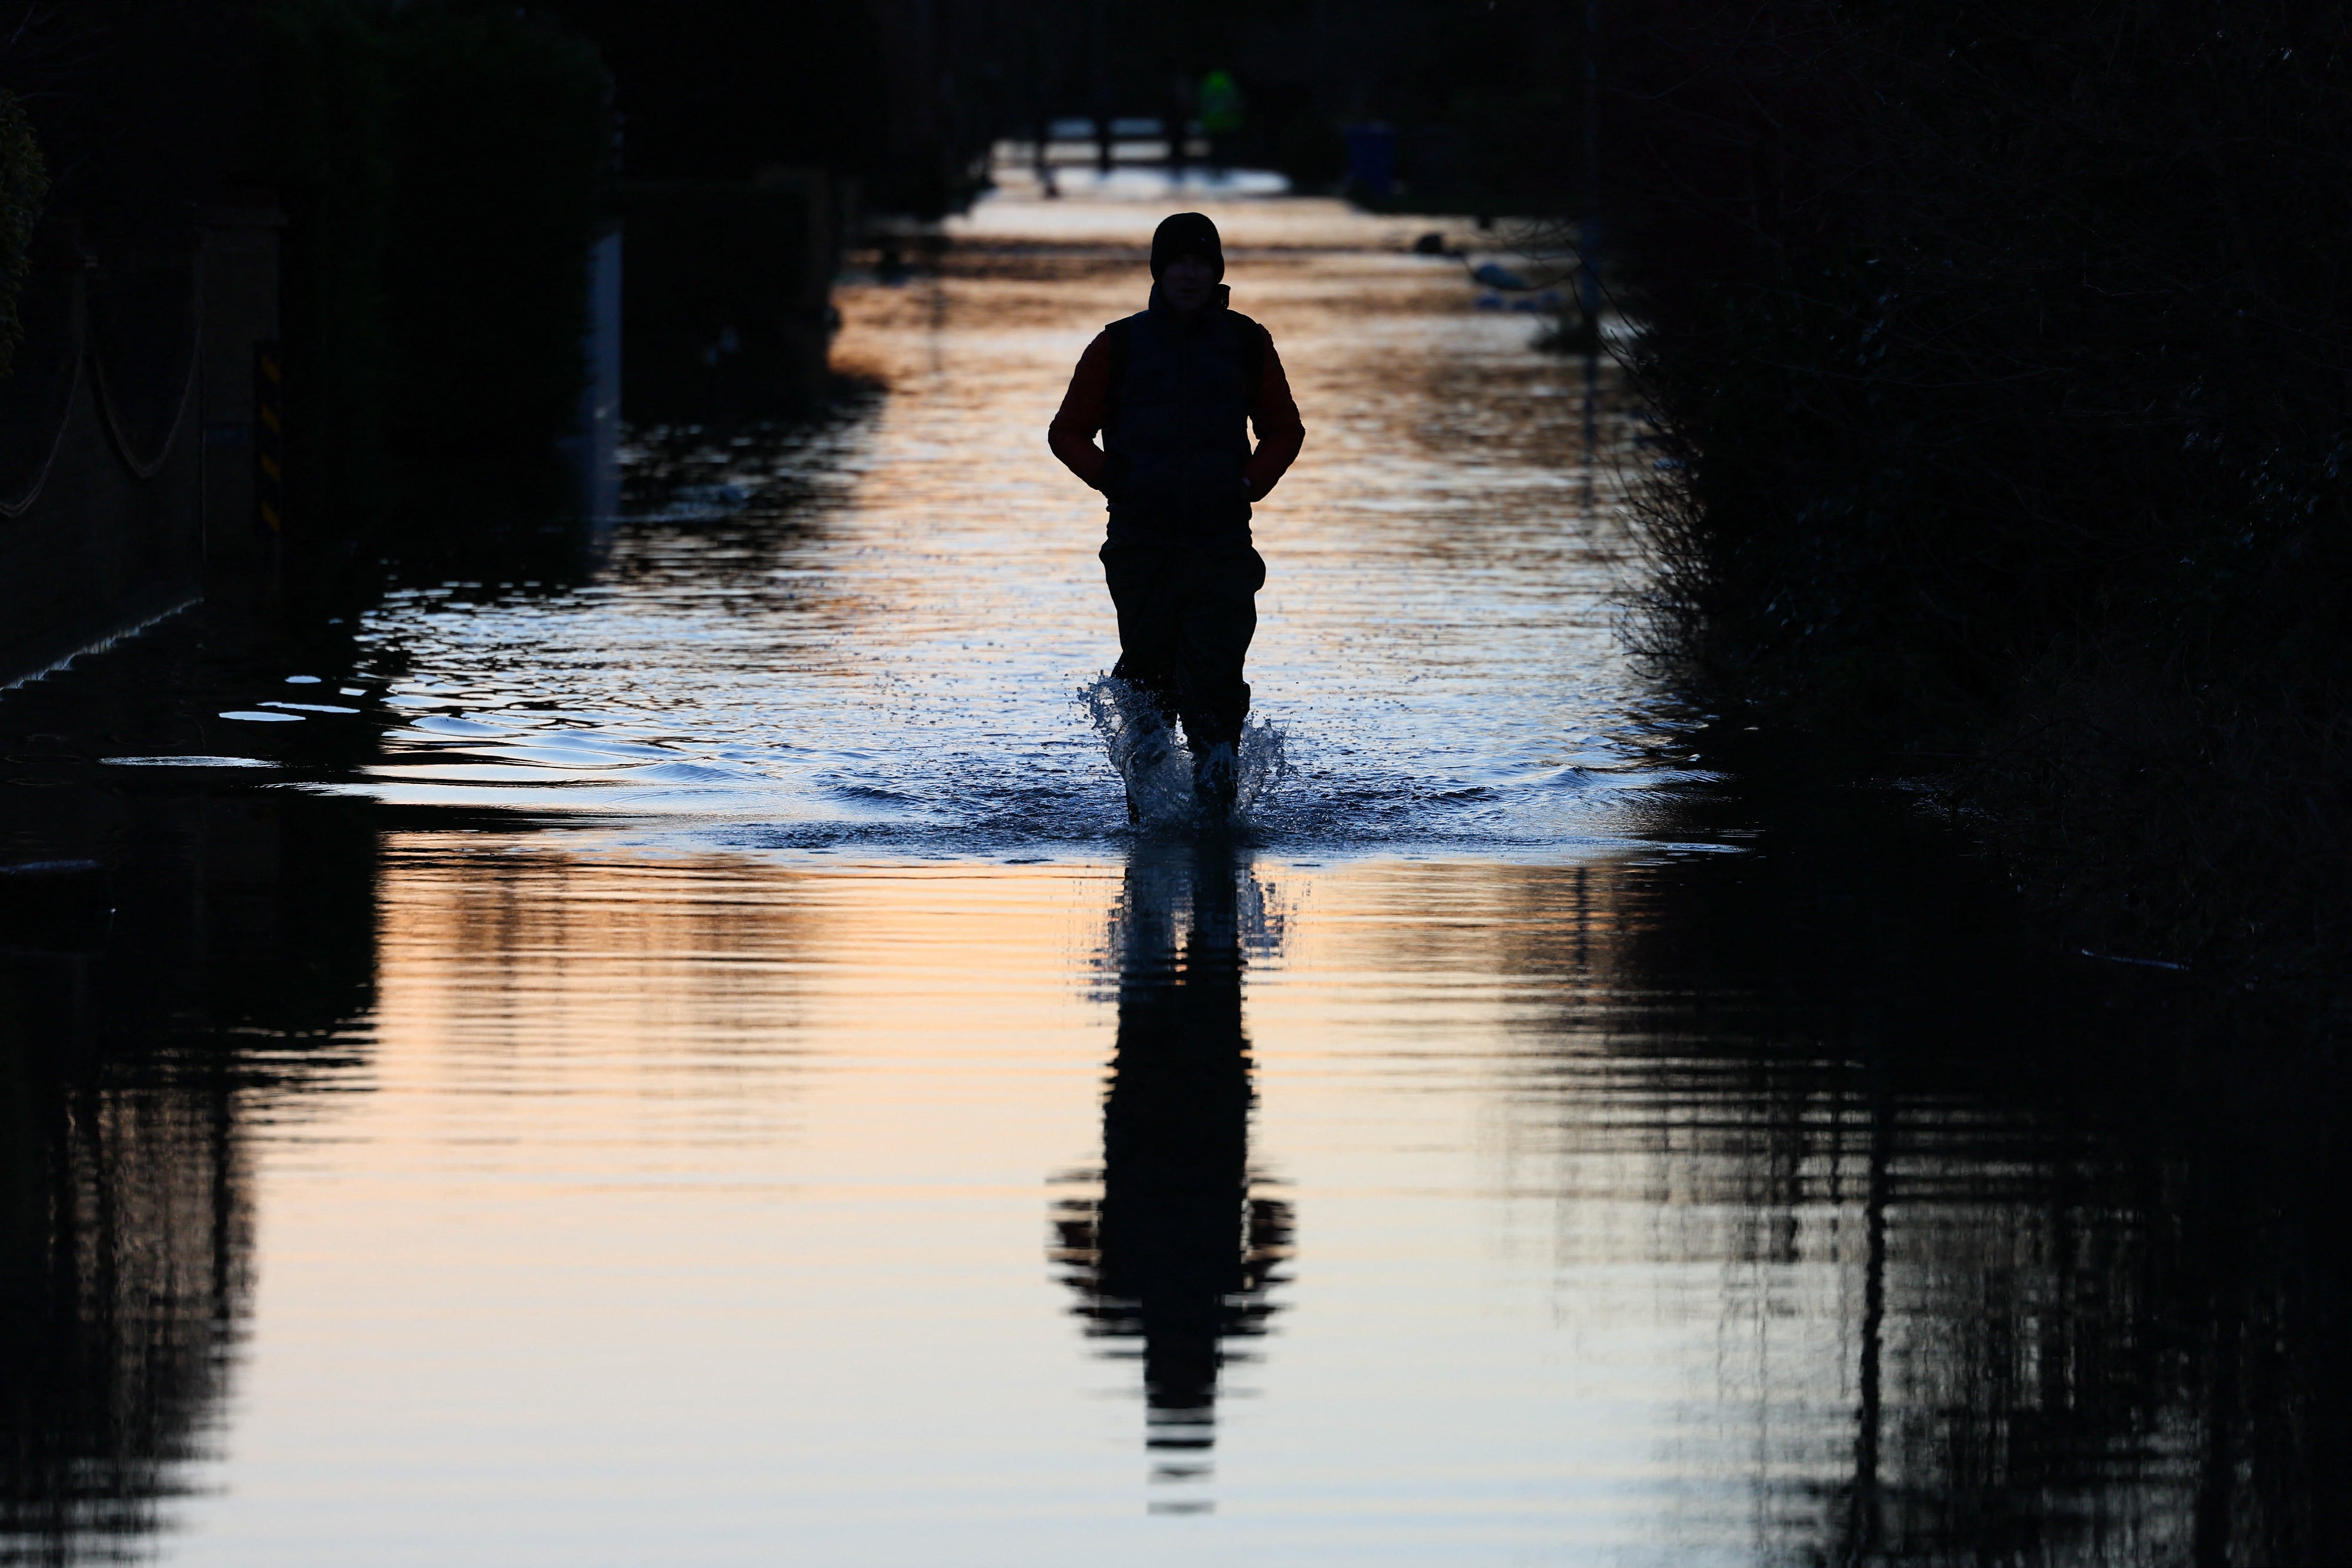 File image: A person walks through a flooded road in Wraysbury, west of London during flooding in January. Met Office forecasts more rain is set to fall on saturated grounds potentially leading to floods